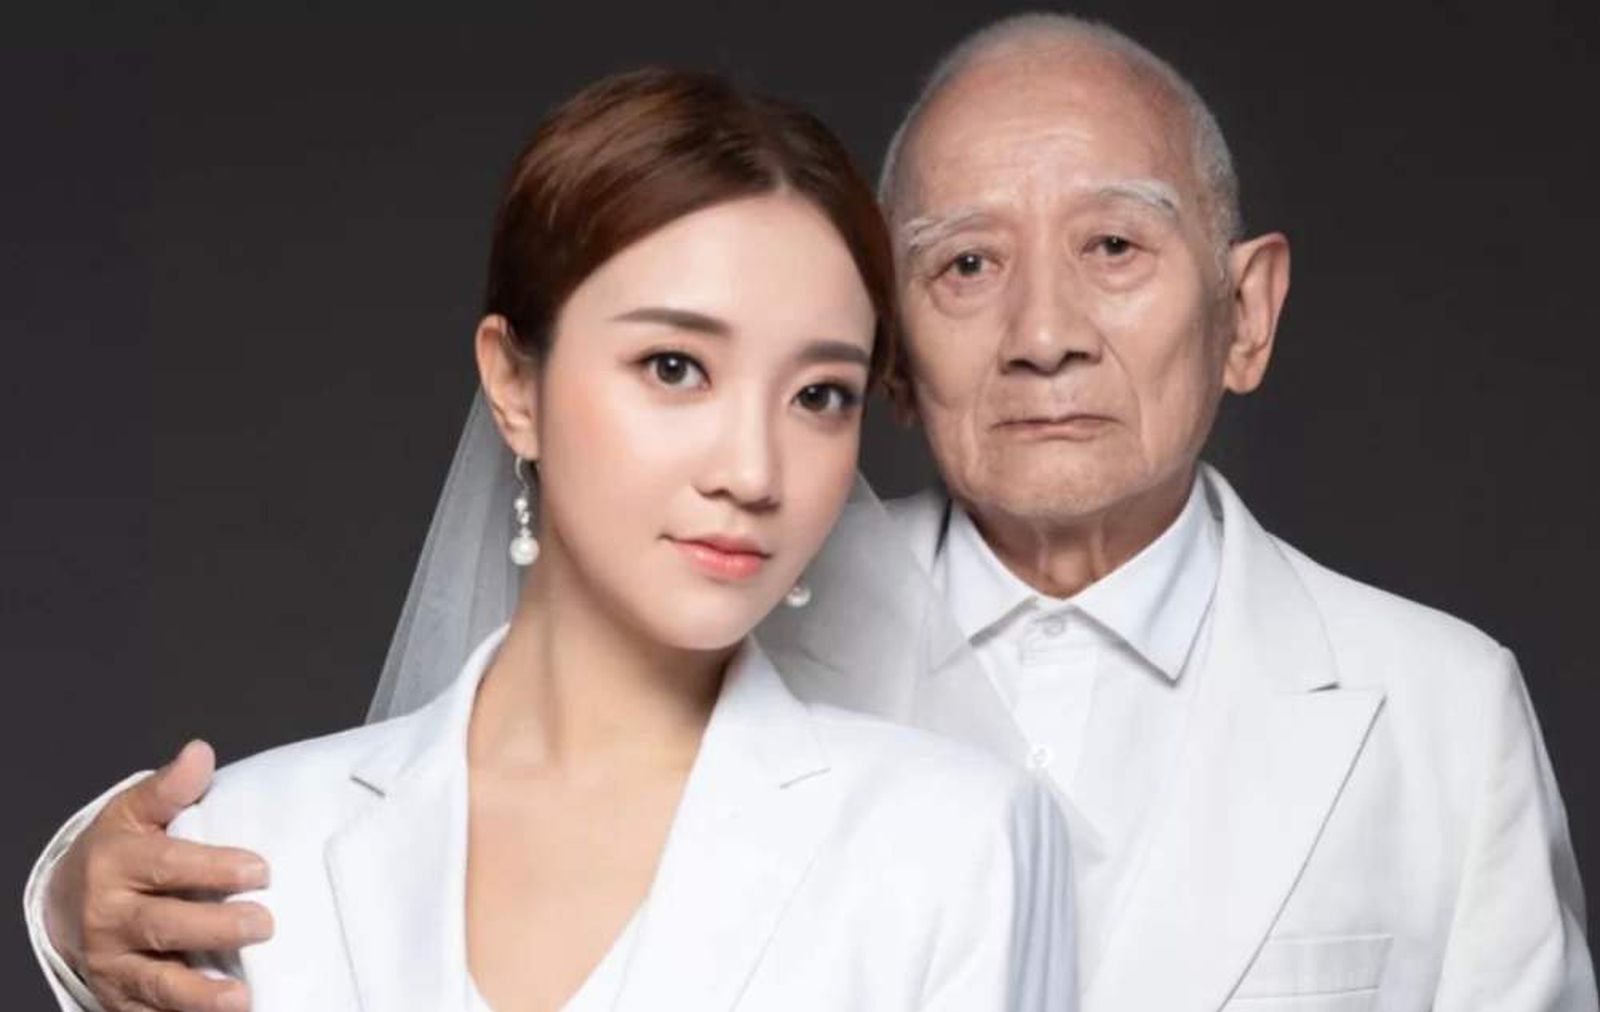 Grandpa and granddaughter smeared as